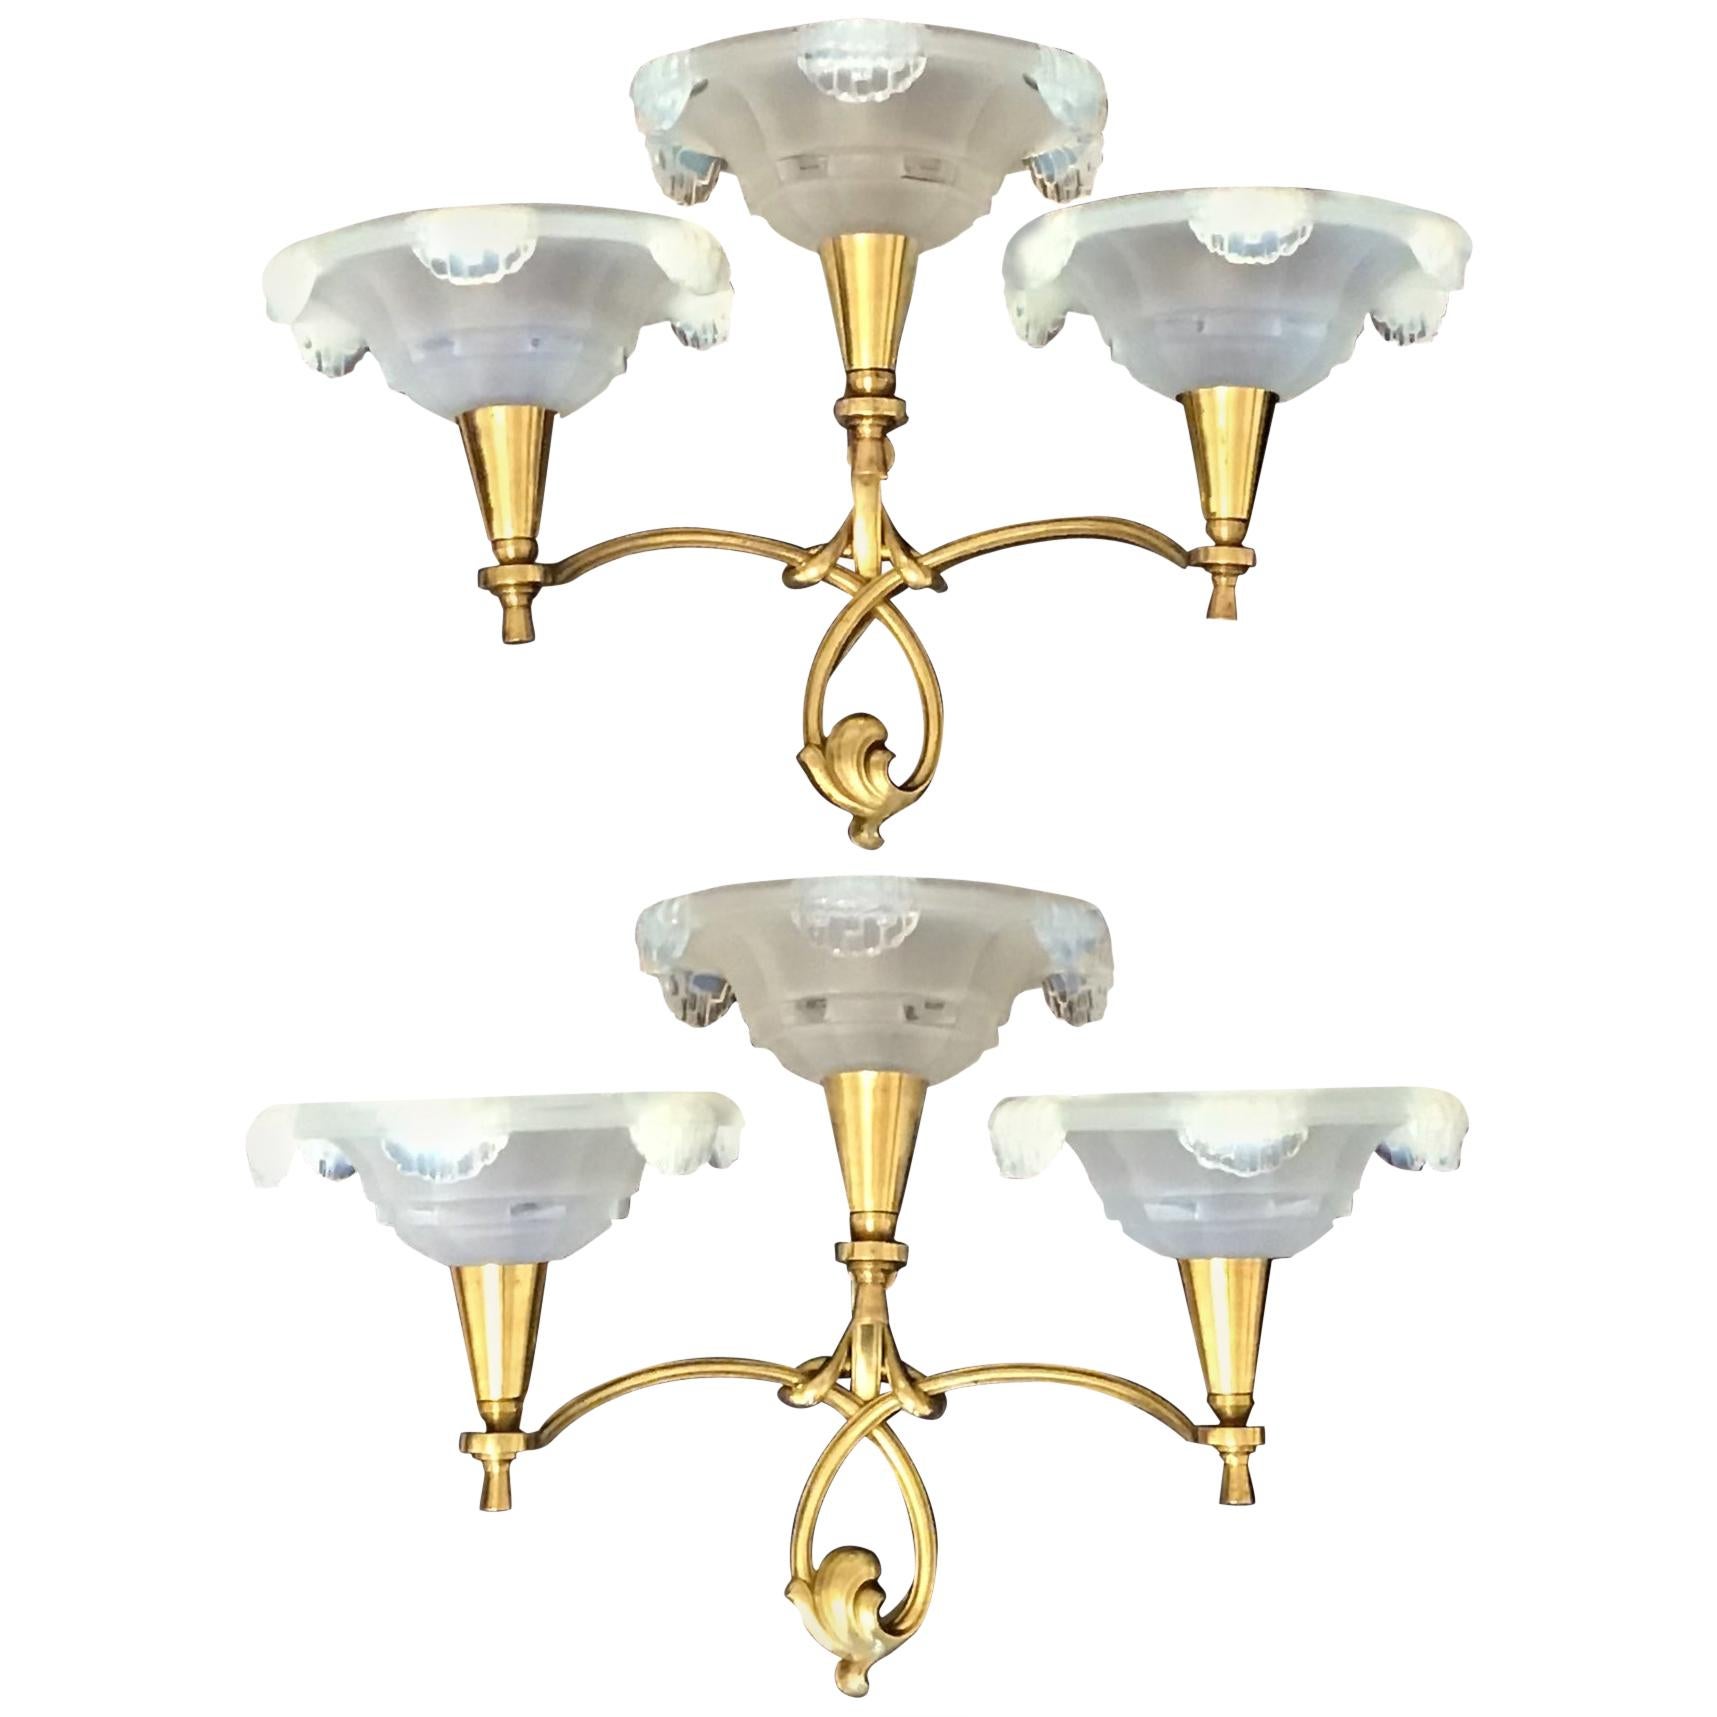 Pair of Large Solid Brass Stamped Art Deco Wall Sconces, France, circa 1930s